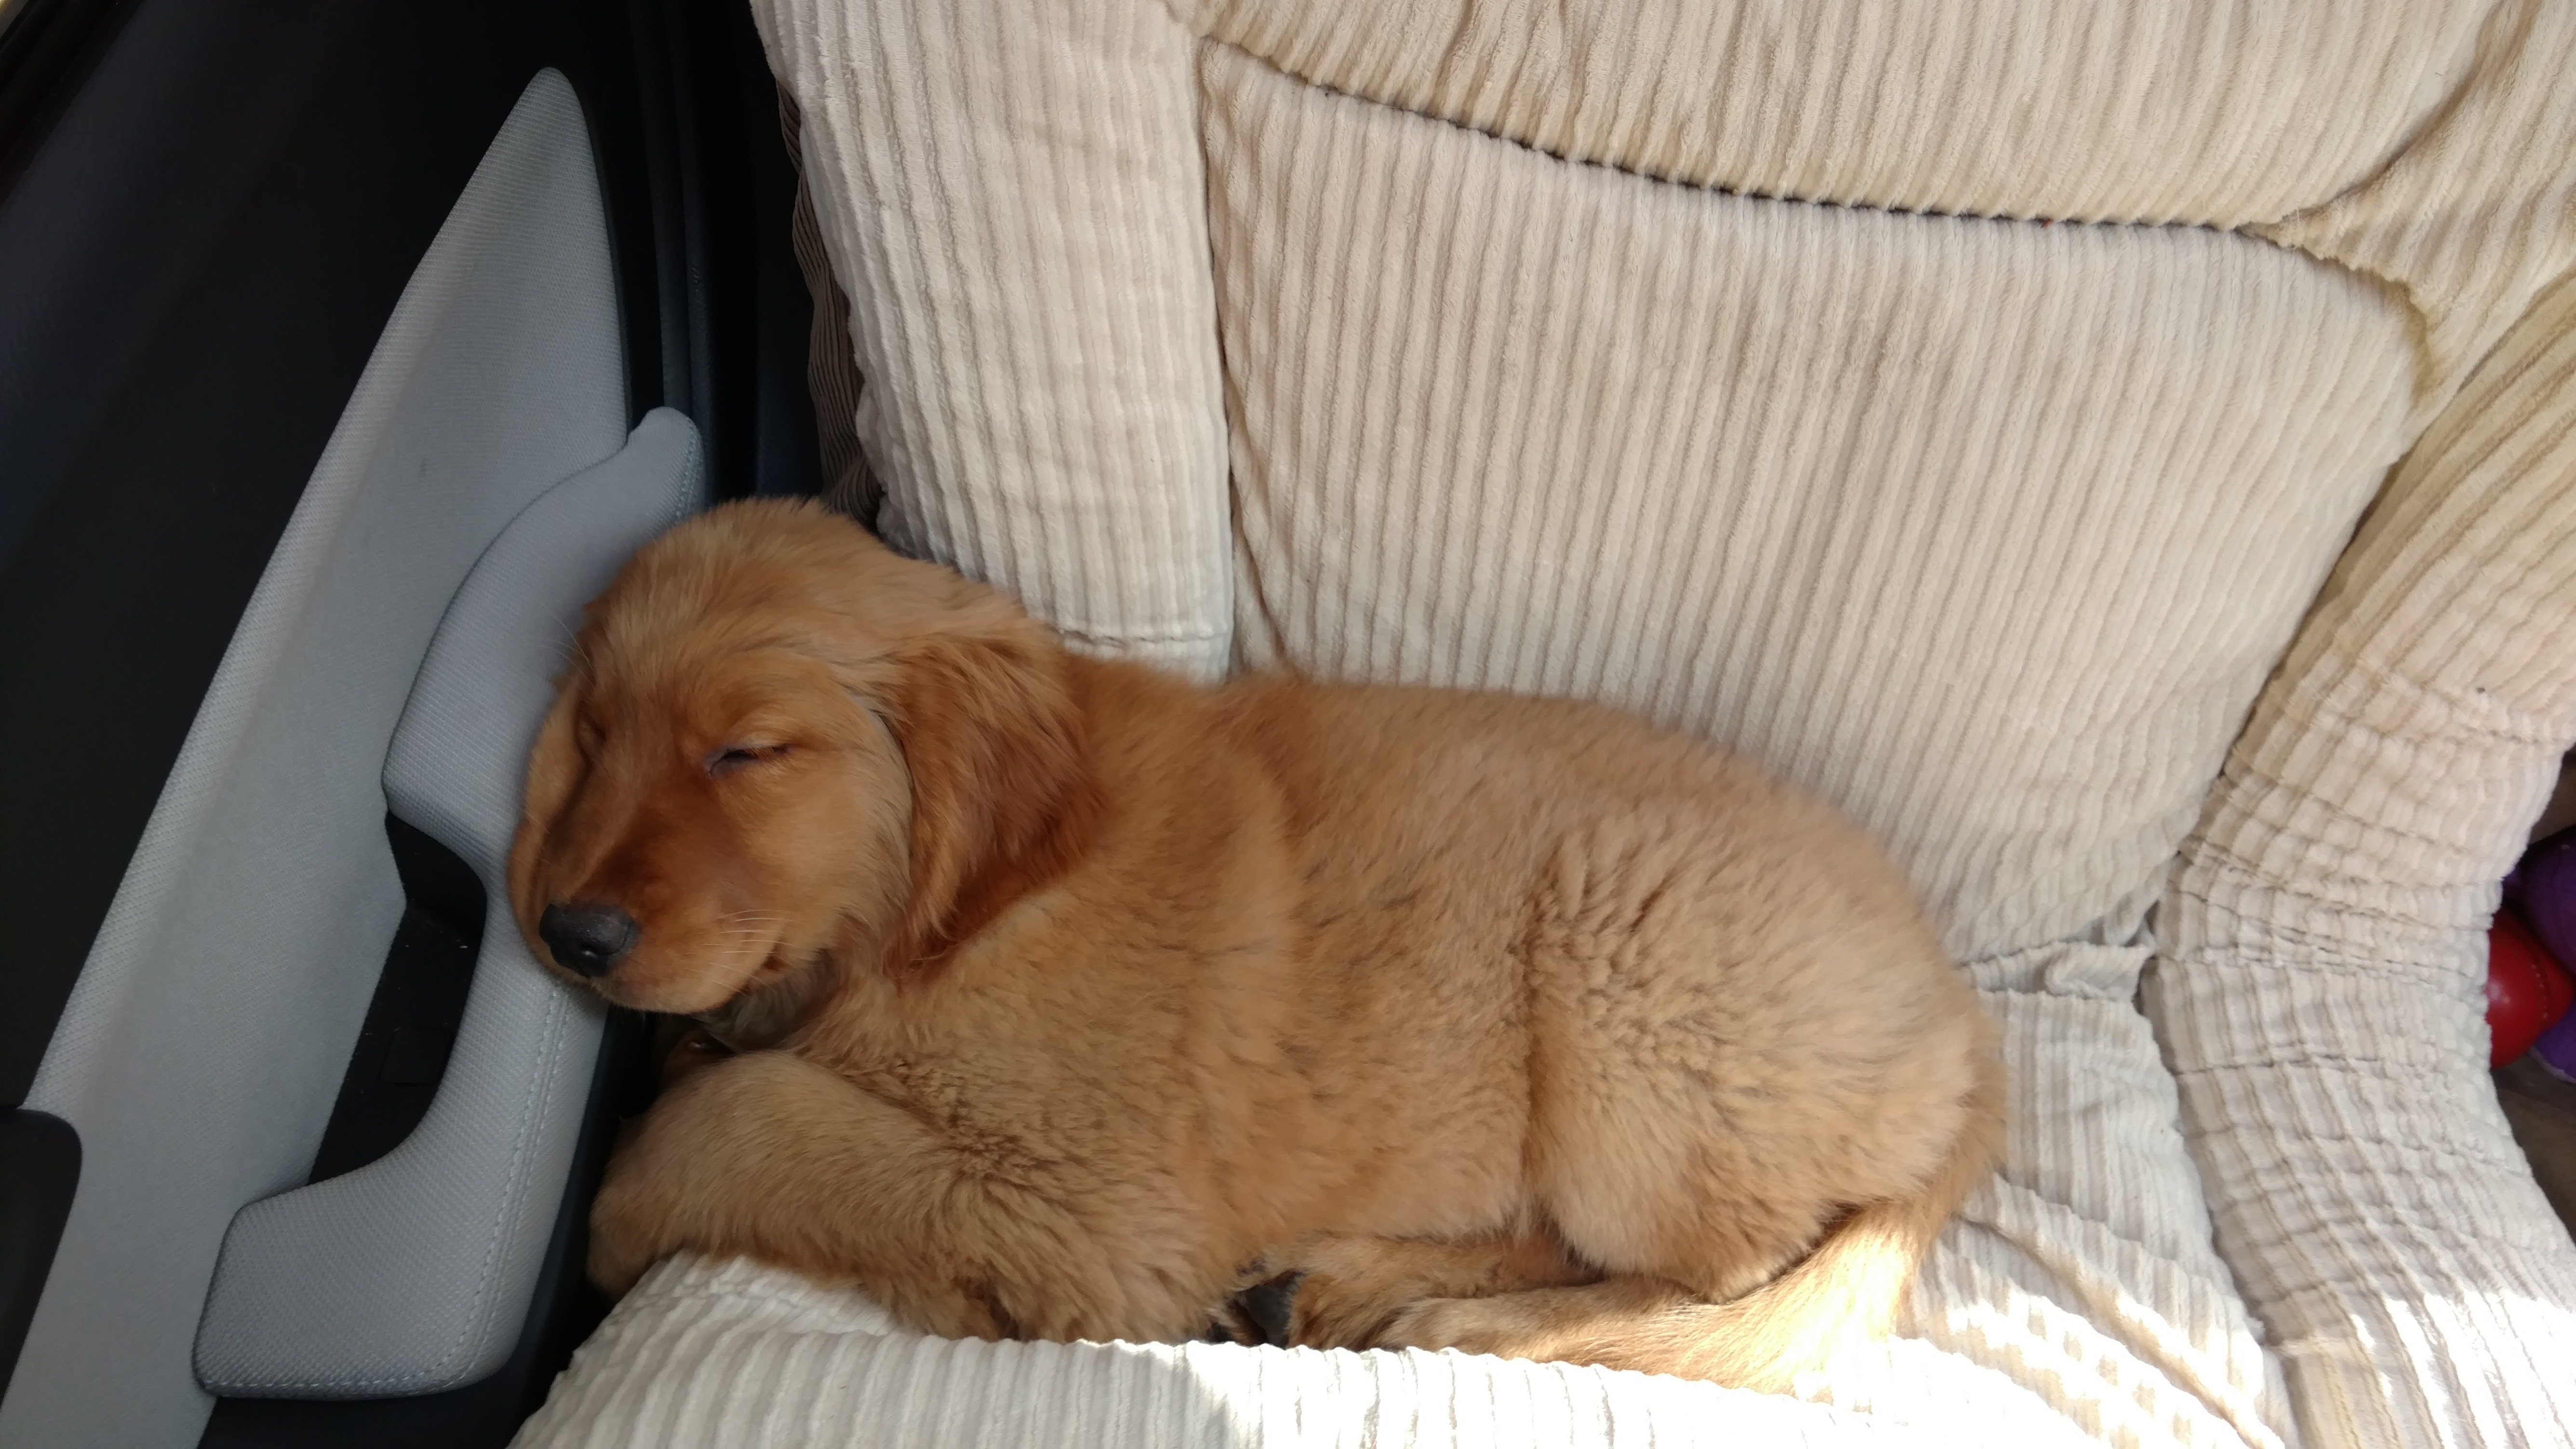 Passed out on the ride home